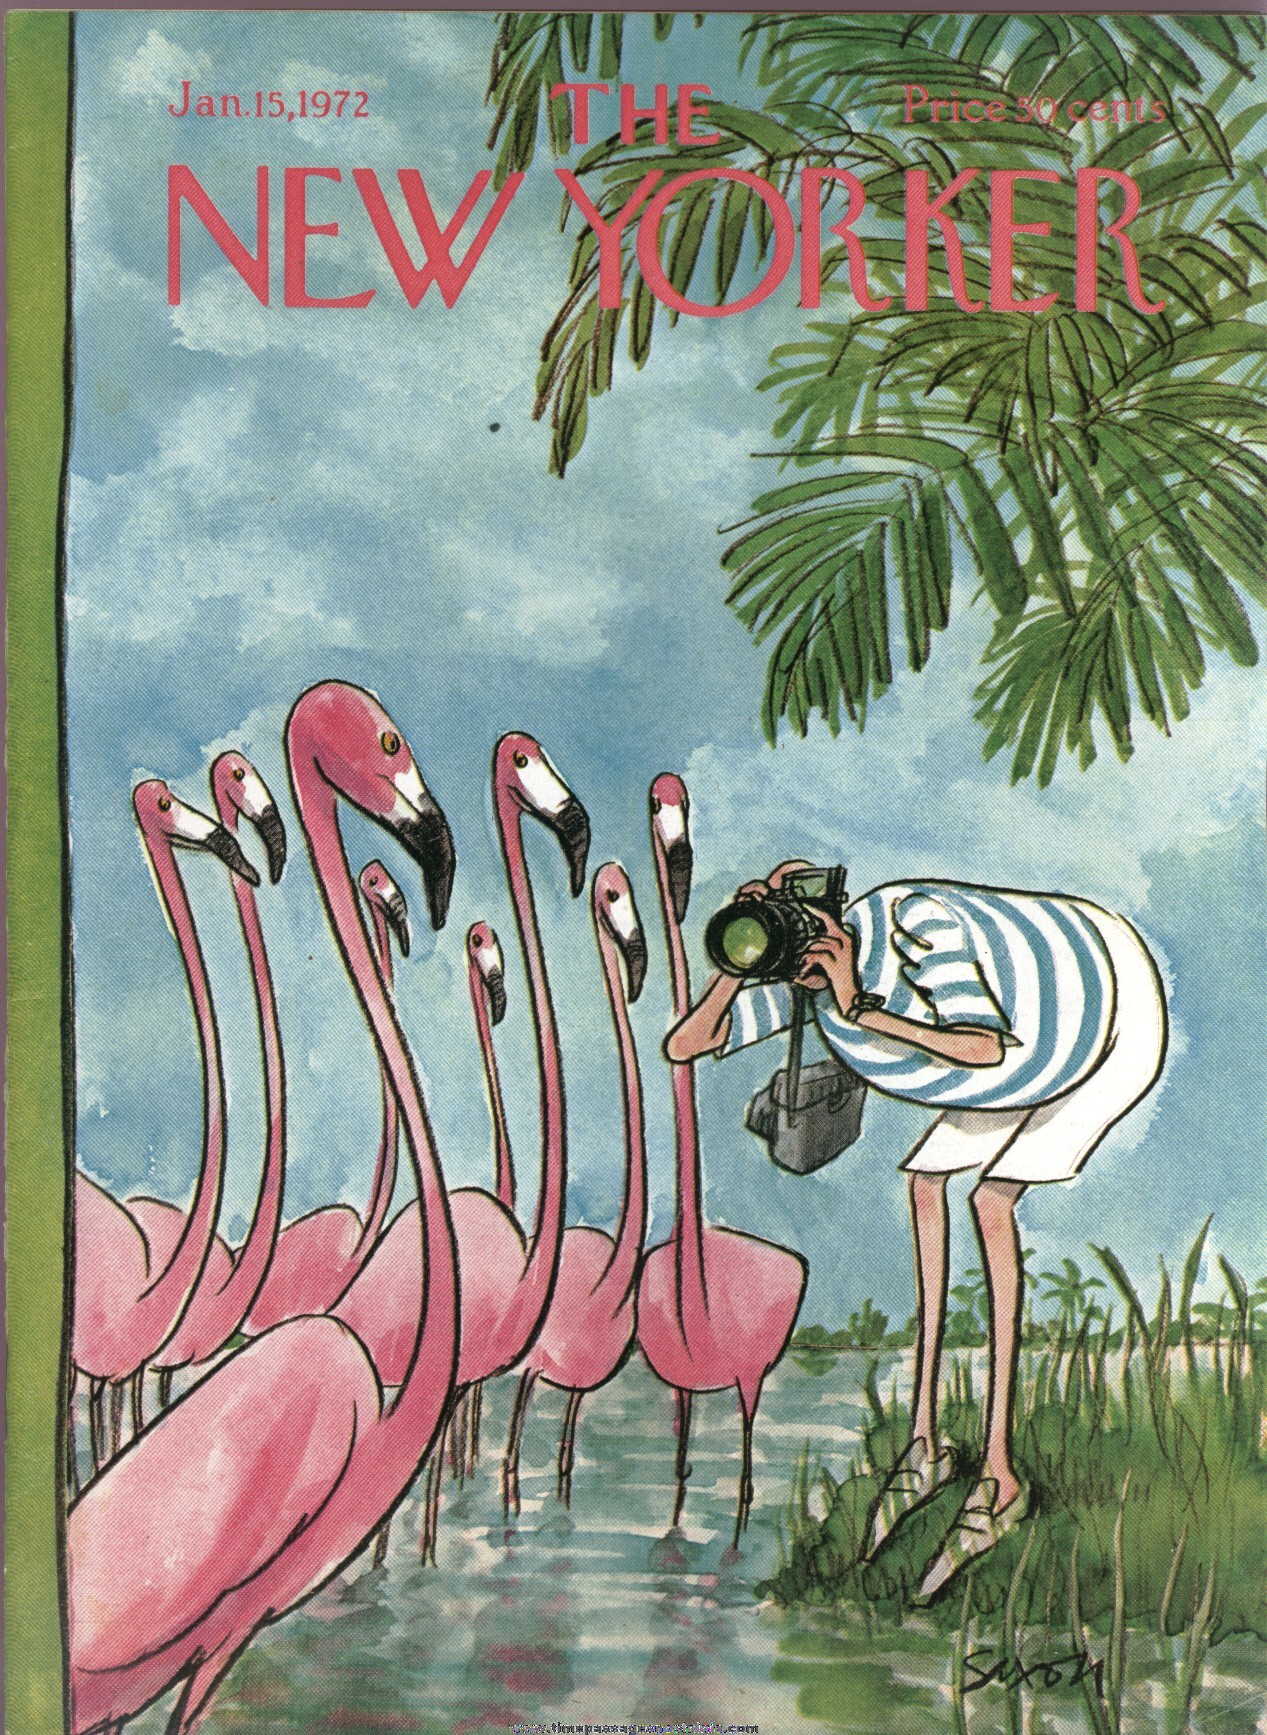 New Yorker Magazine - January 15, 1972 - Cover by Charles Saxon